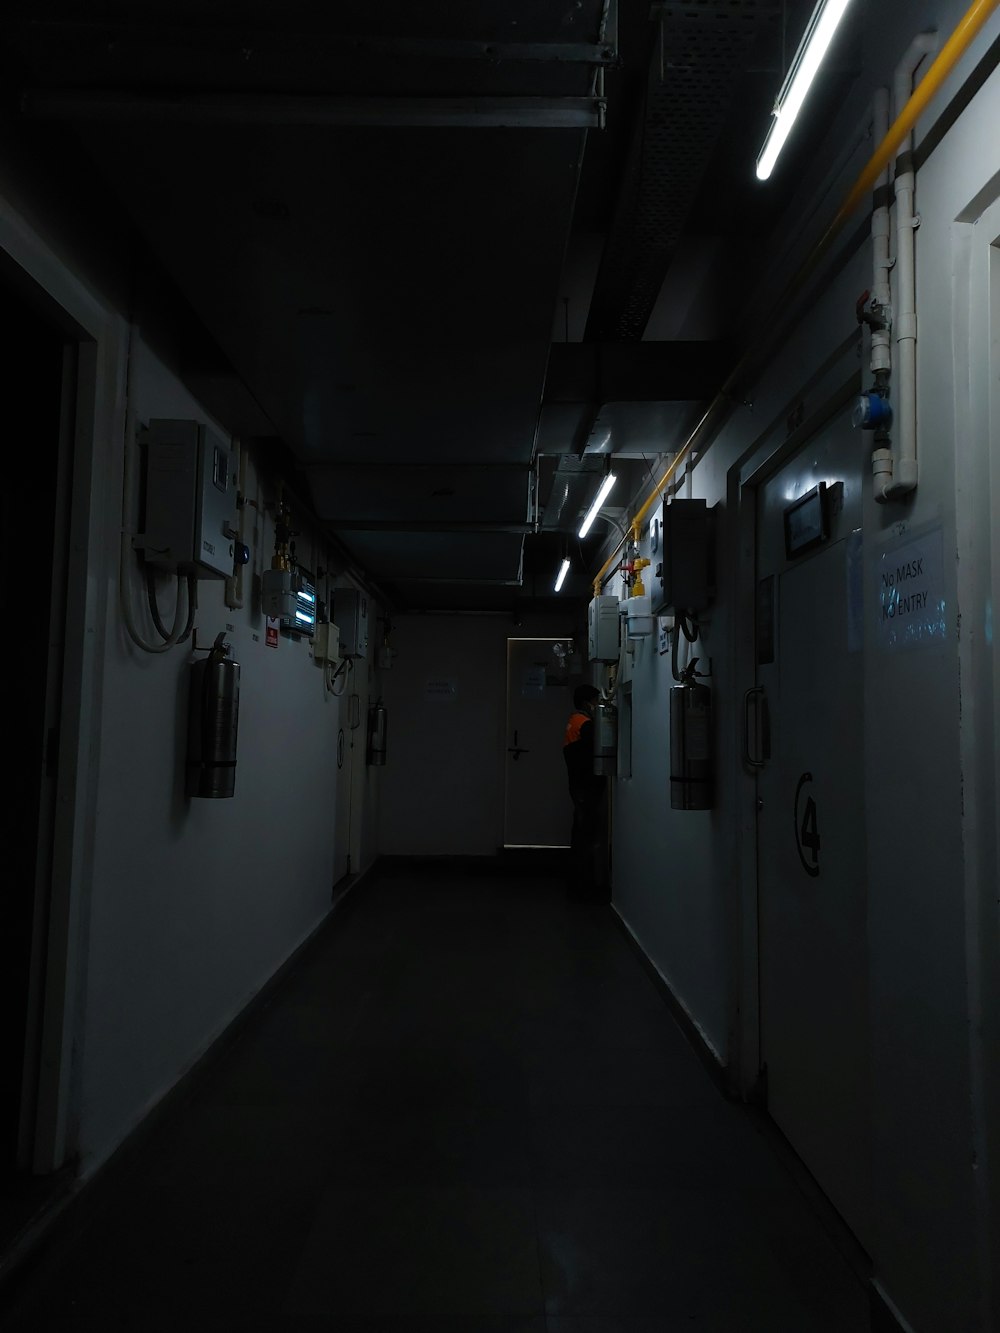 a dark hallway with electrical equipment on the walls